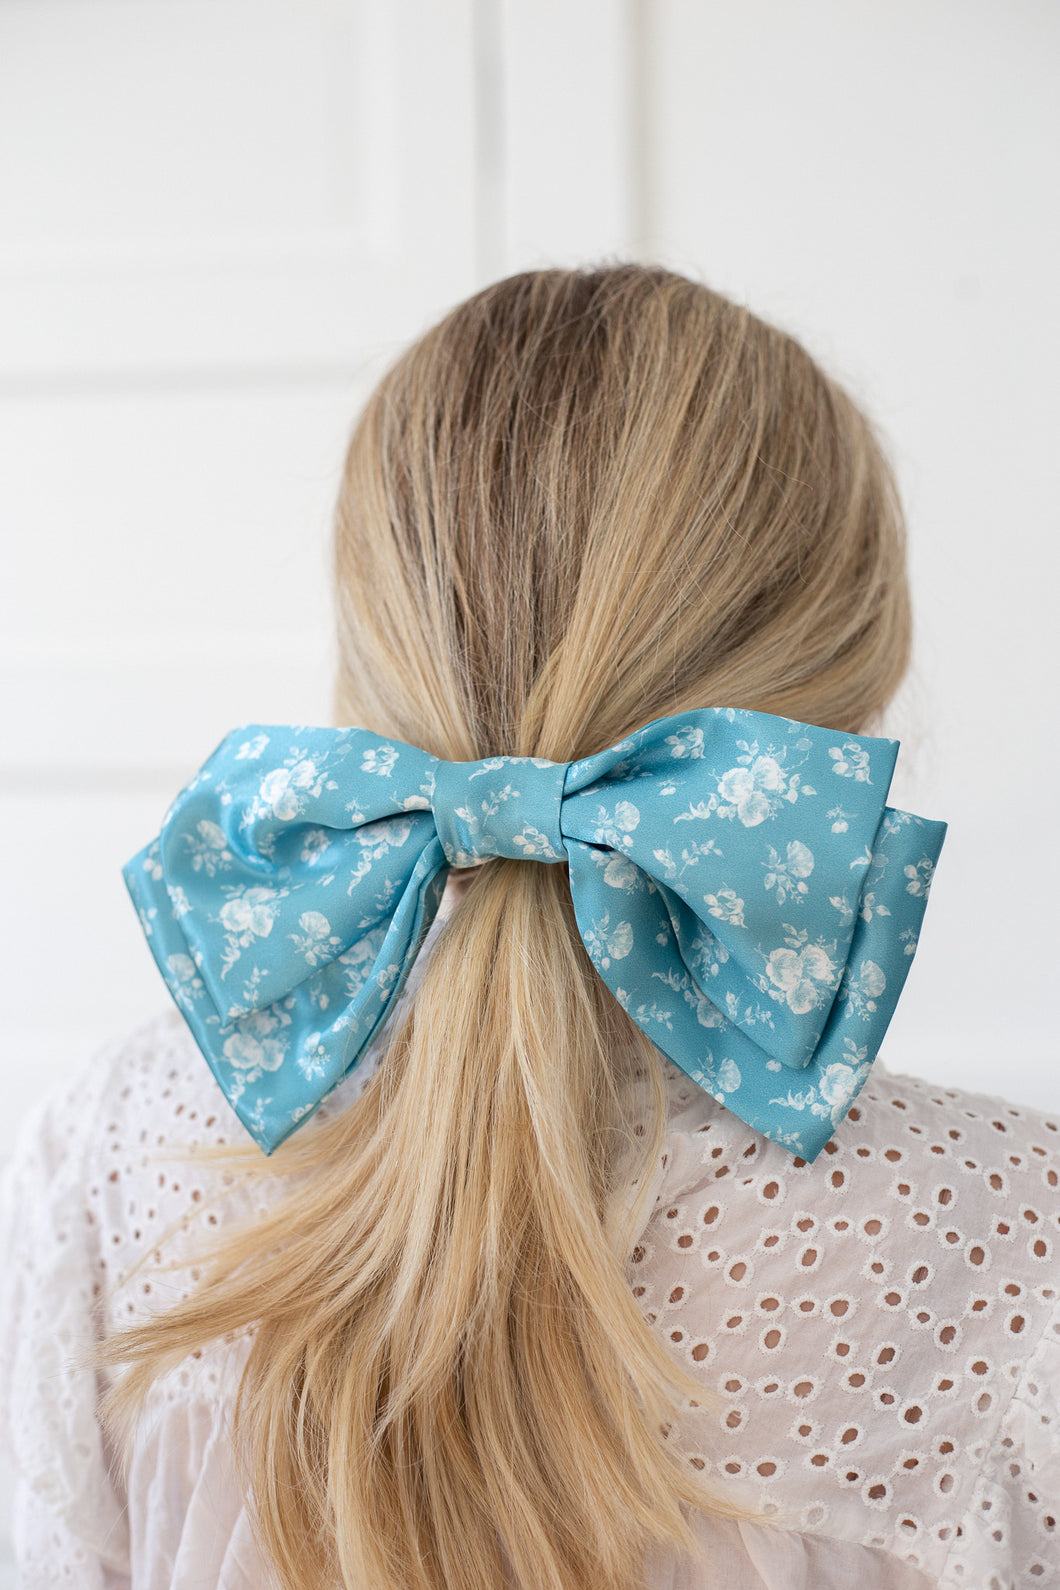 Clara large satin bow in teal floral, Elizabeth Alice Studio x Grace and Grandeur Bow Co.